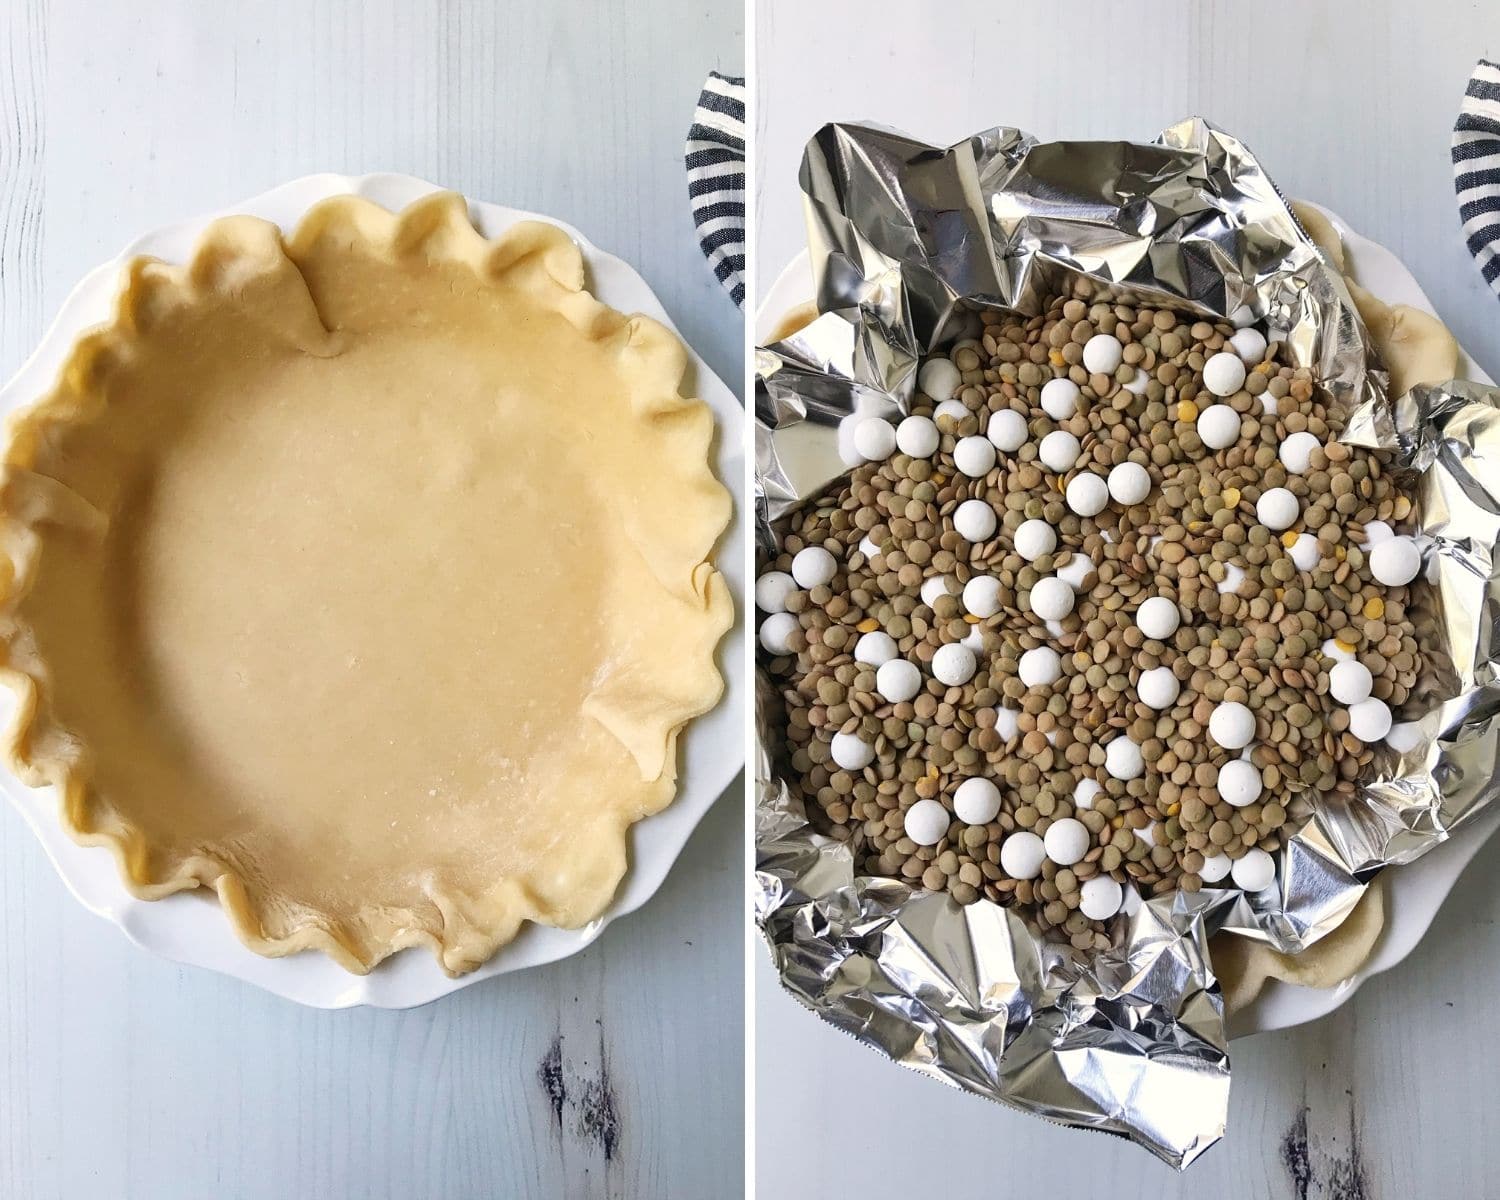 pie dish with unbaked crust and dish filled with pie weights